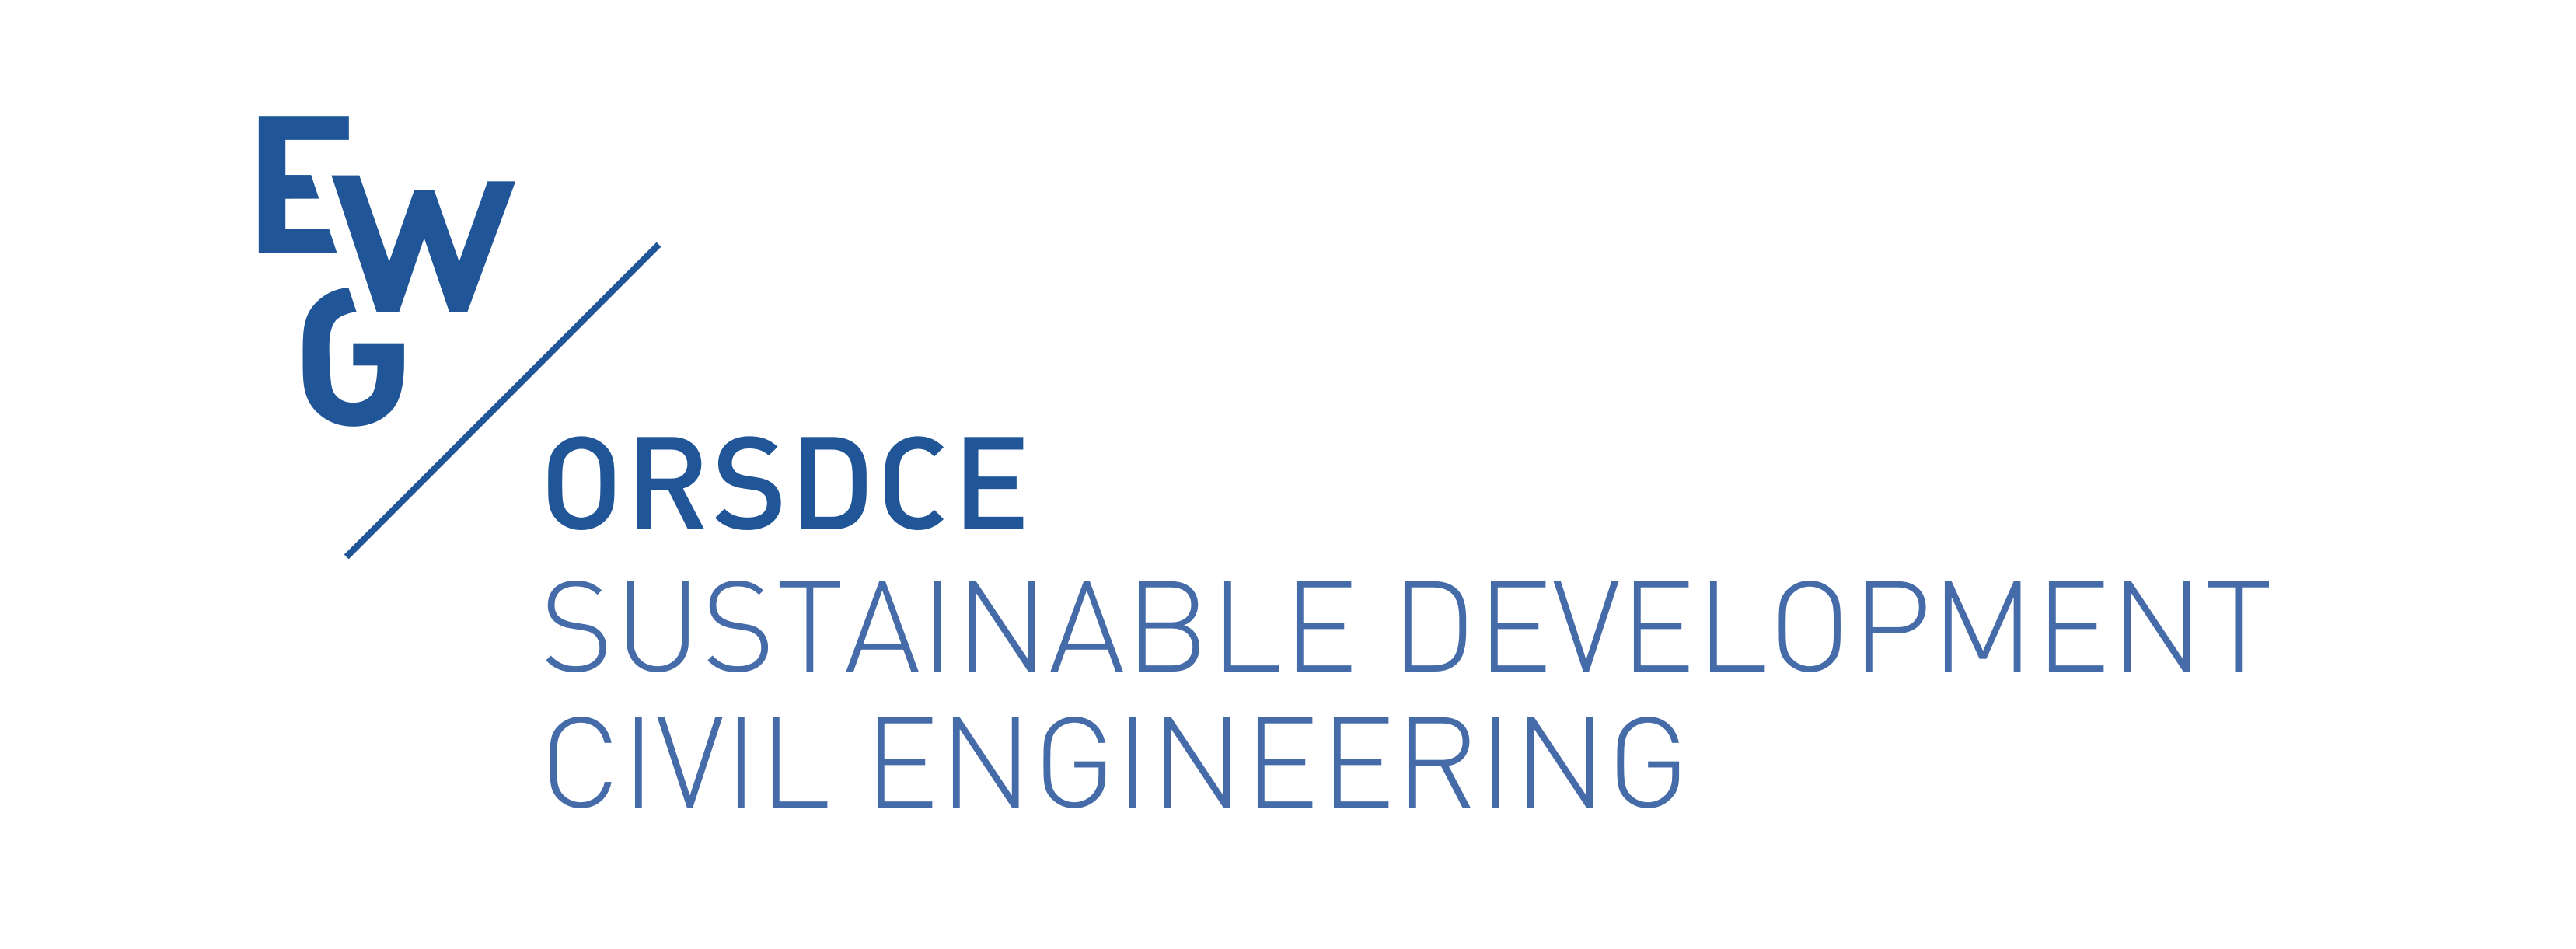 EURO working group on Sustainable Development and Civil Engineering (ORSDCE)